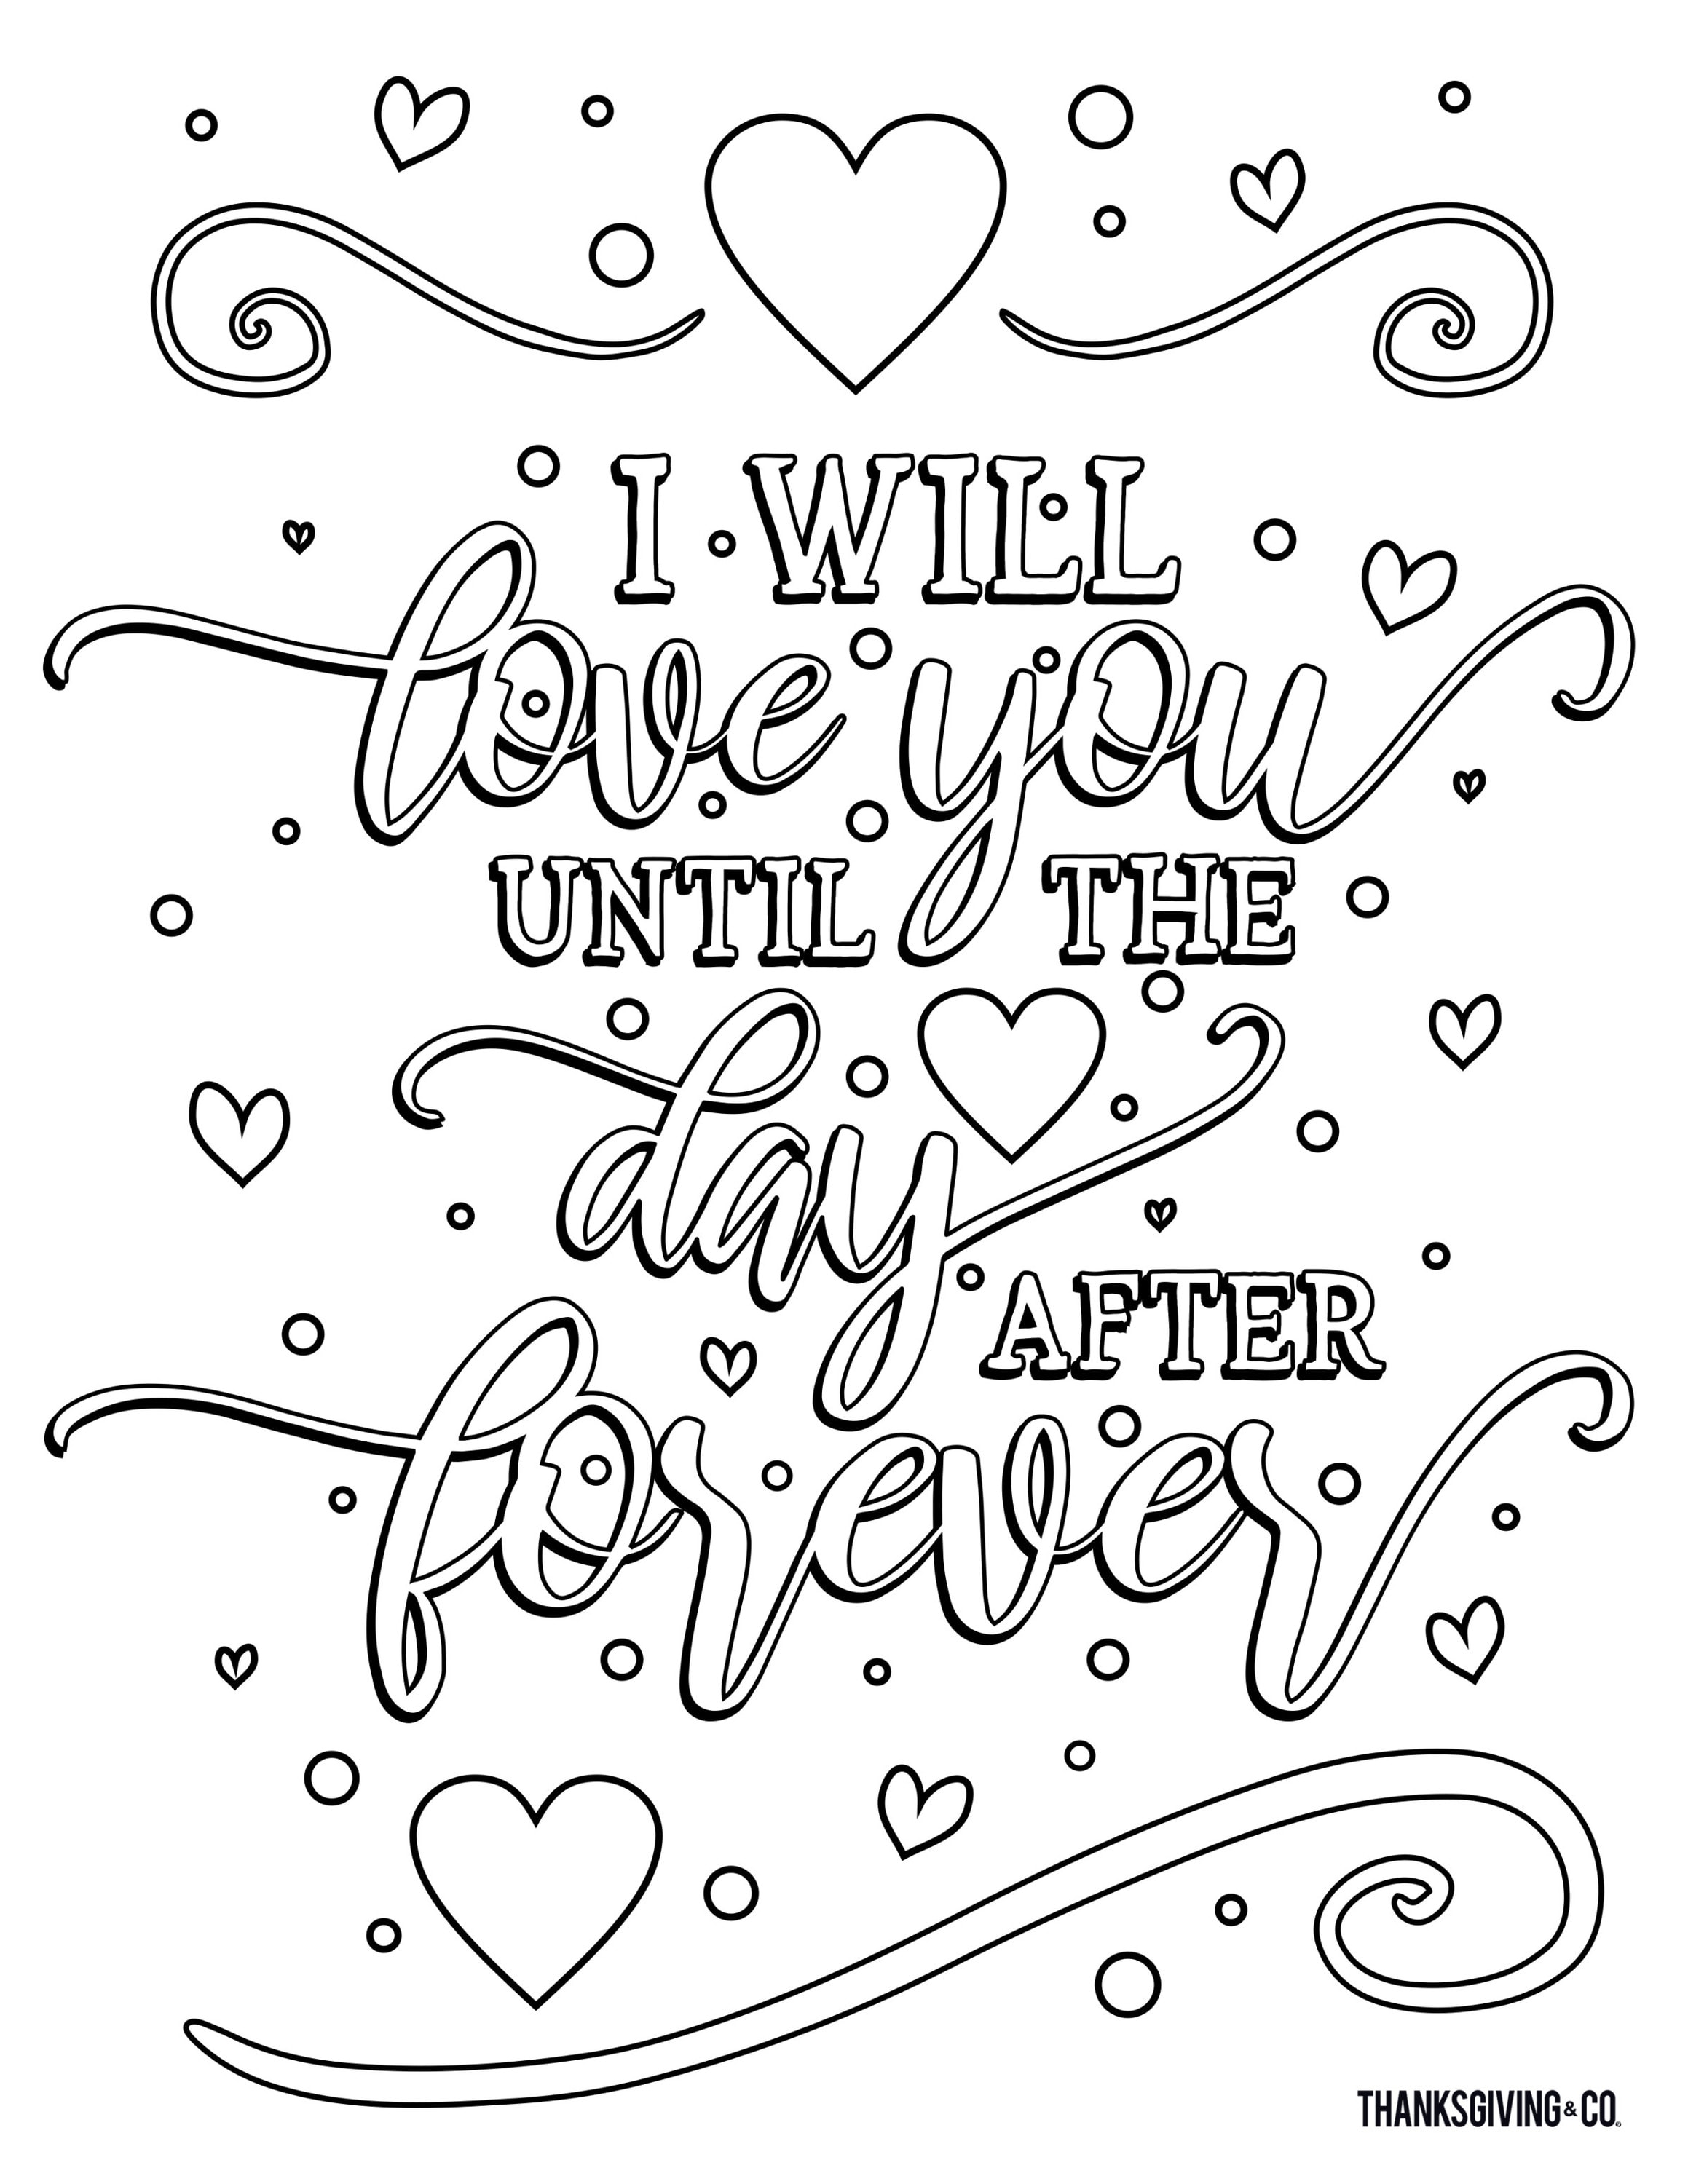 4 Free Adult Coloring Pages For Valentine S Day That Will Bring Out Your Inner Child